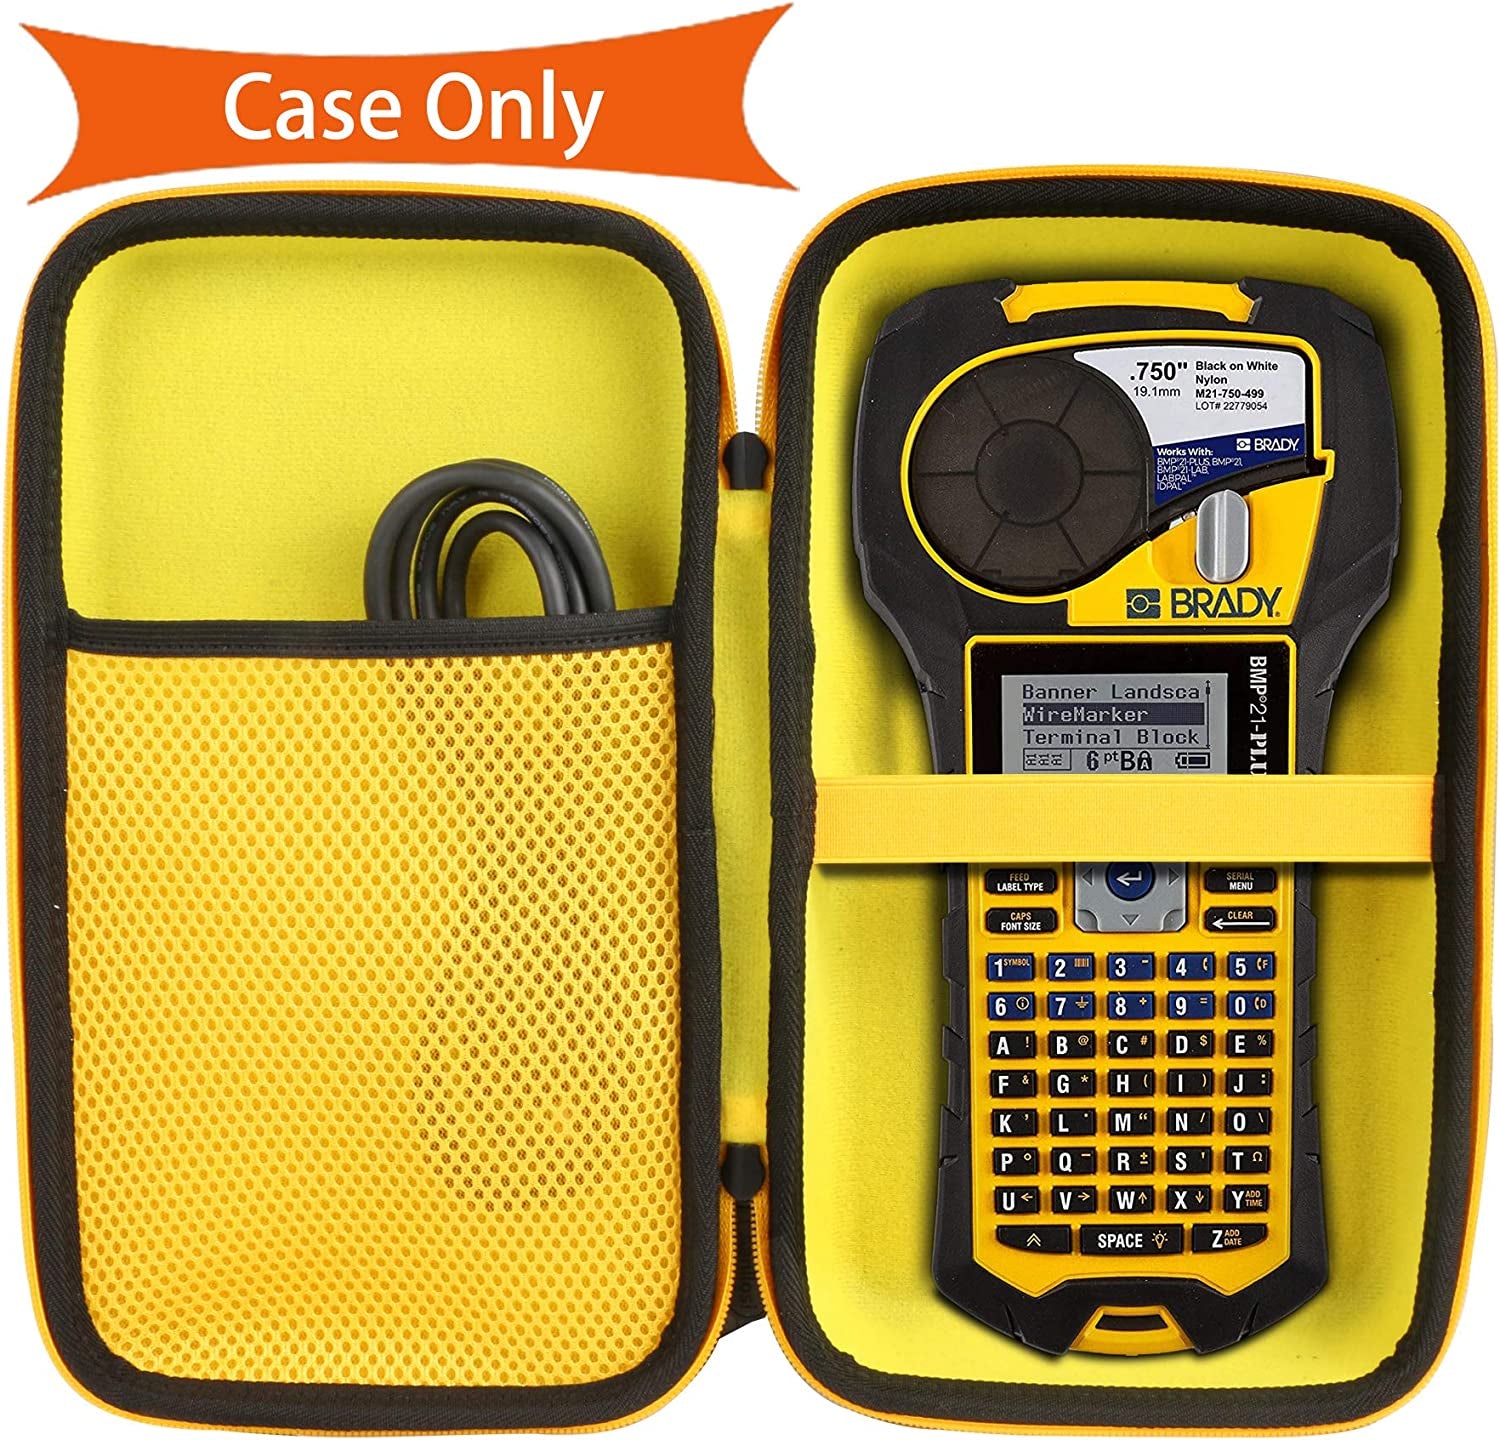 Hard Carrying Case Compatible with Brady M210 (BMP21-PLUS) Handheld Label Printer